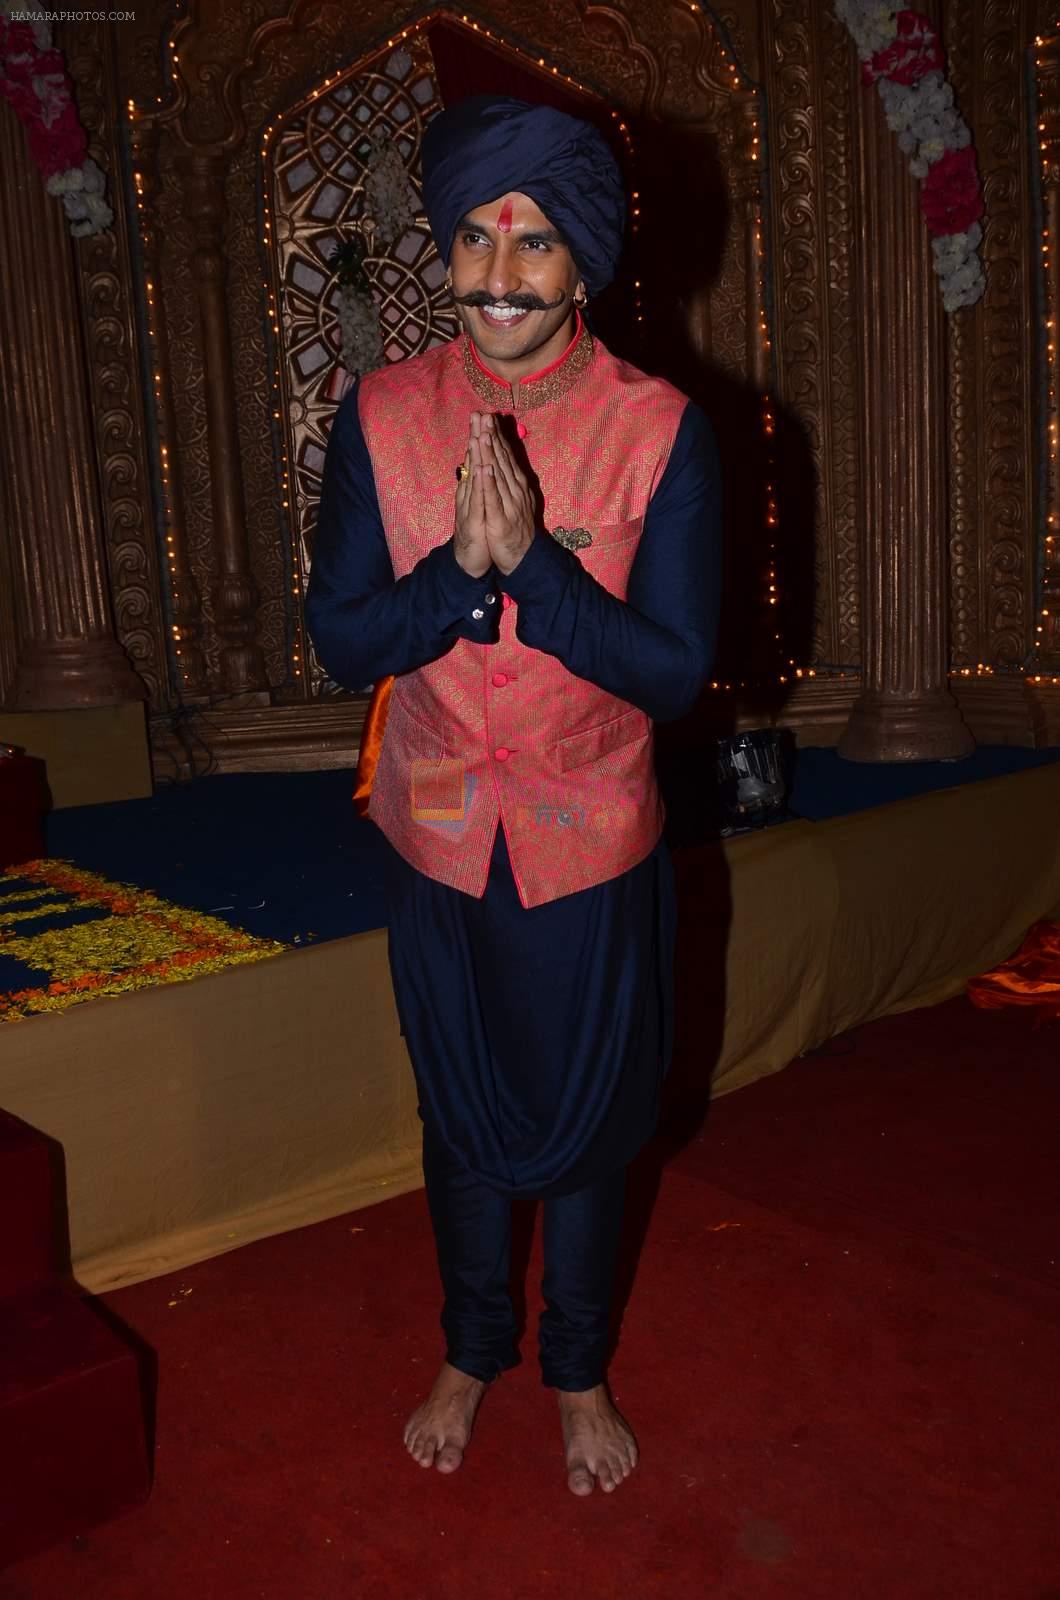 Ranveer Singh promote Bajia's new song on the sets of Udaan in Filmcity, Mumbai on 12th Sept 2015